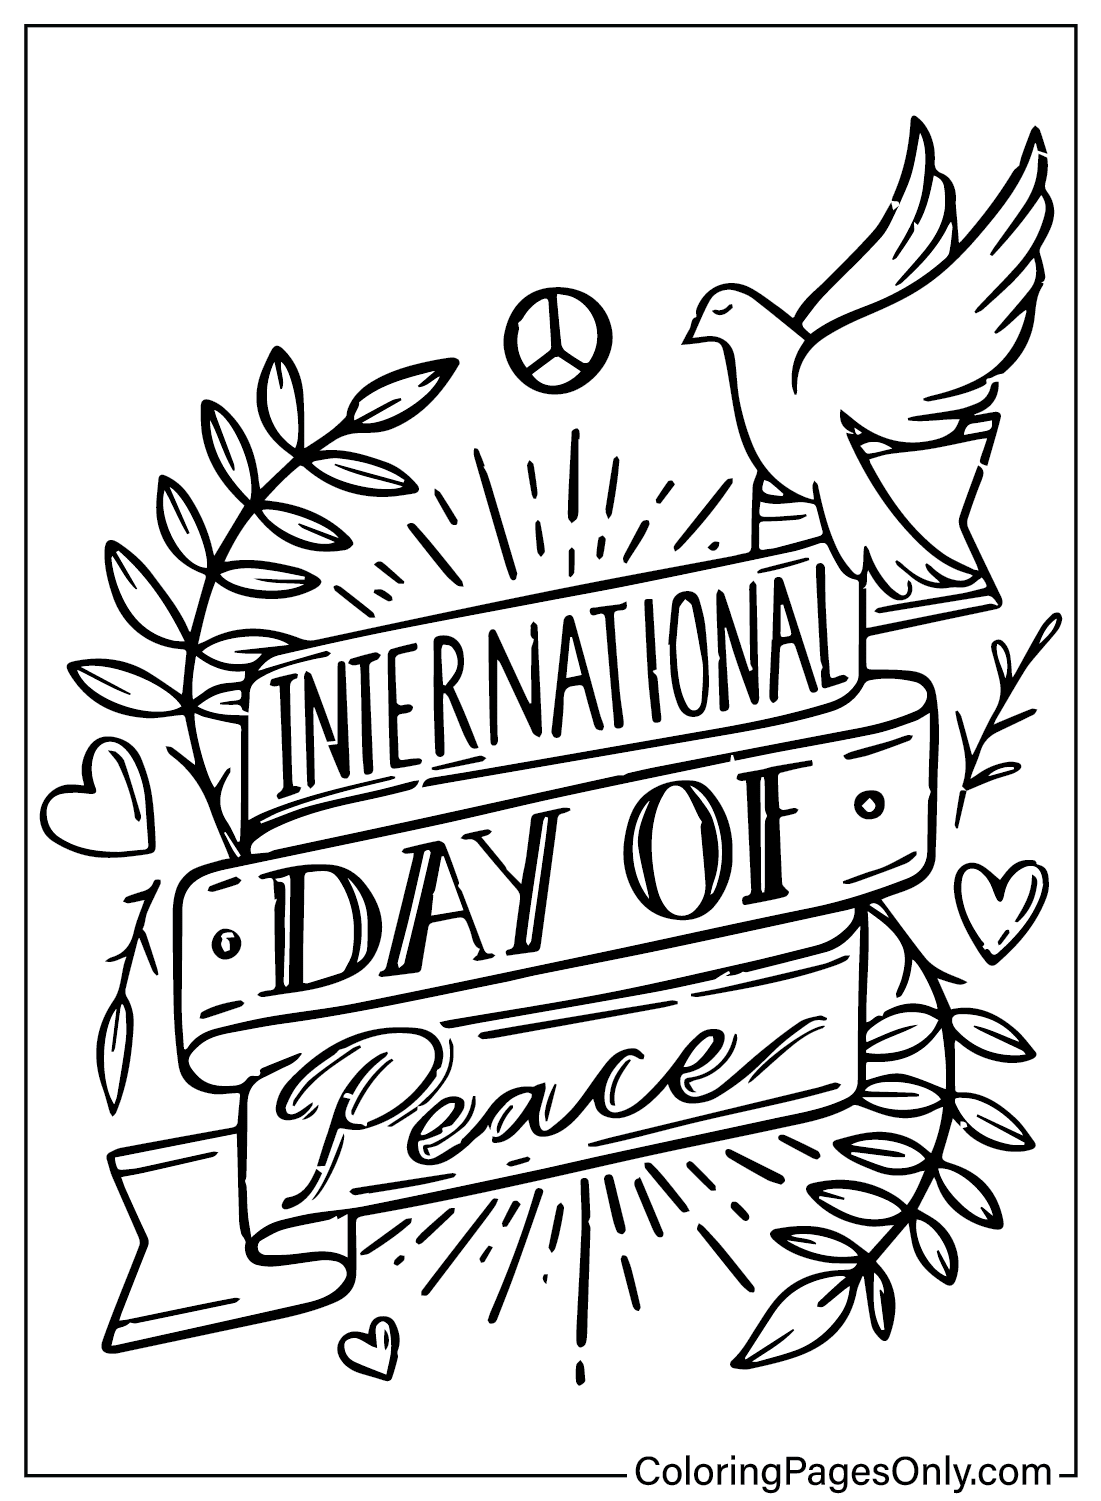 International Day of Peace Picture to Color